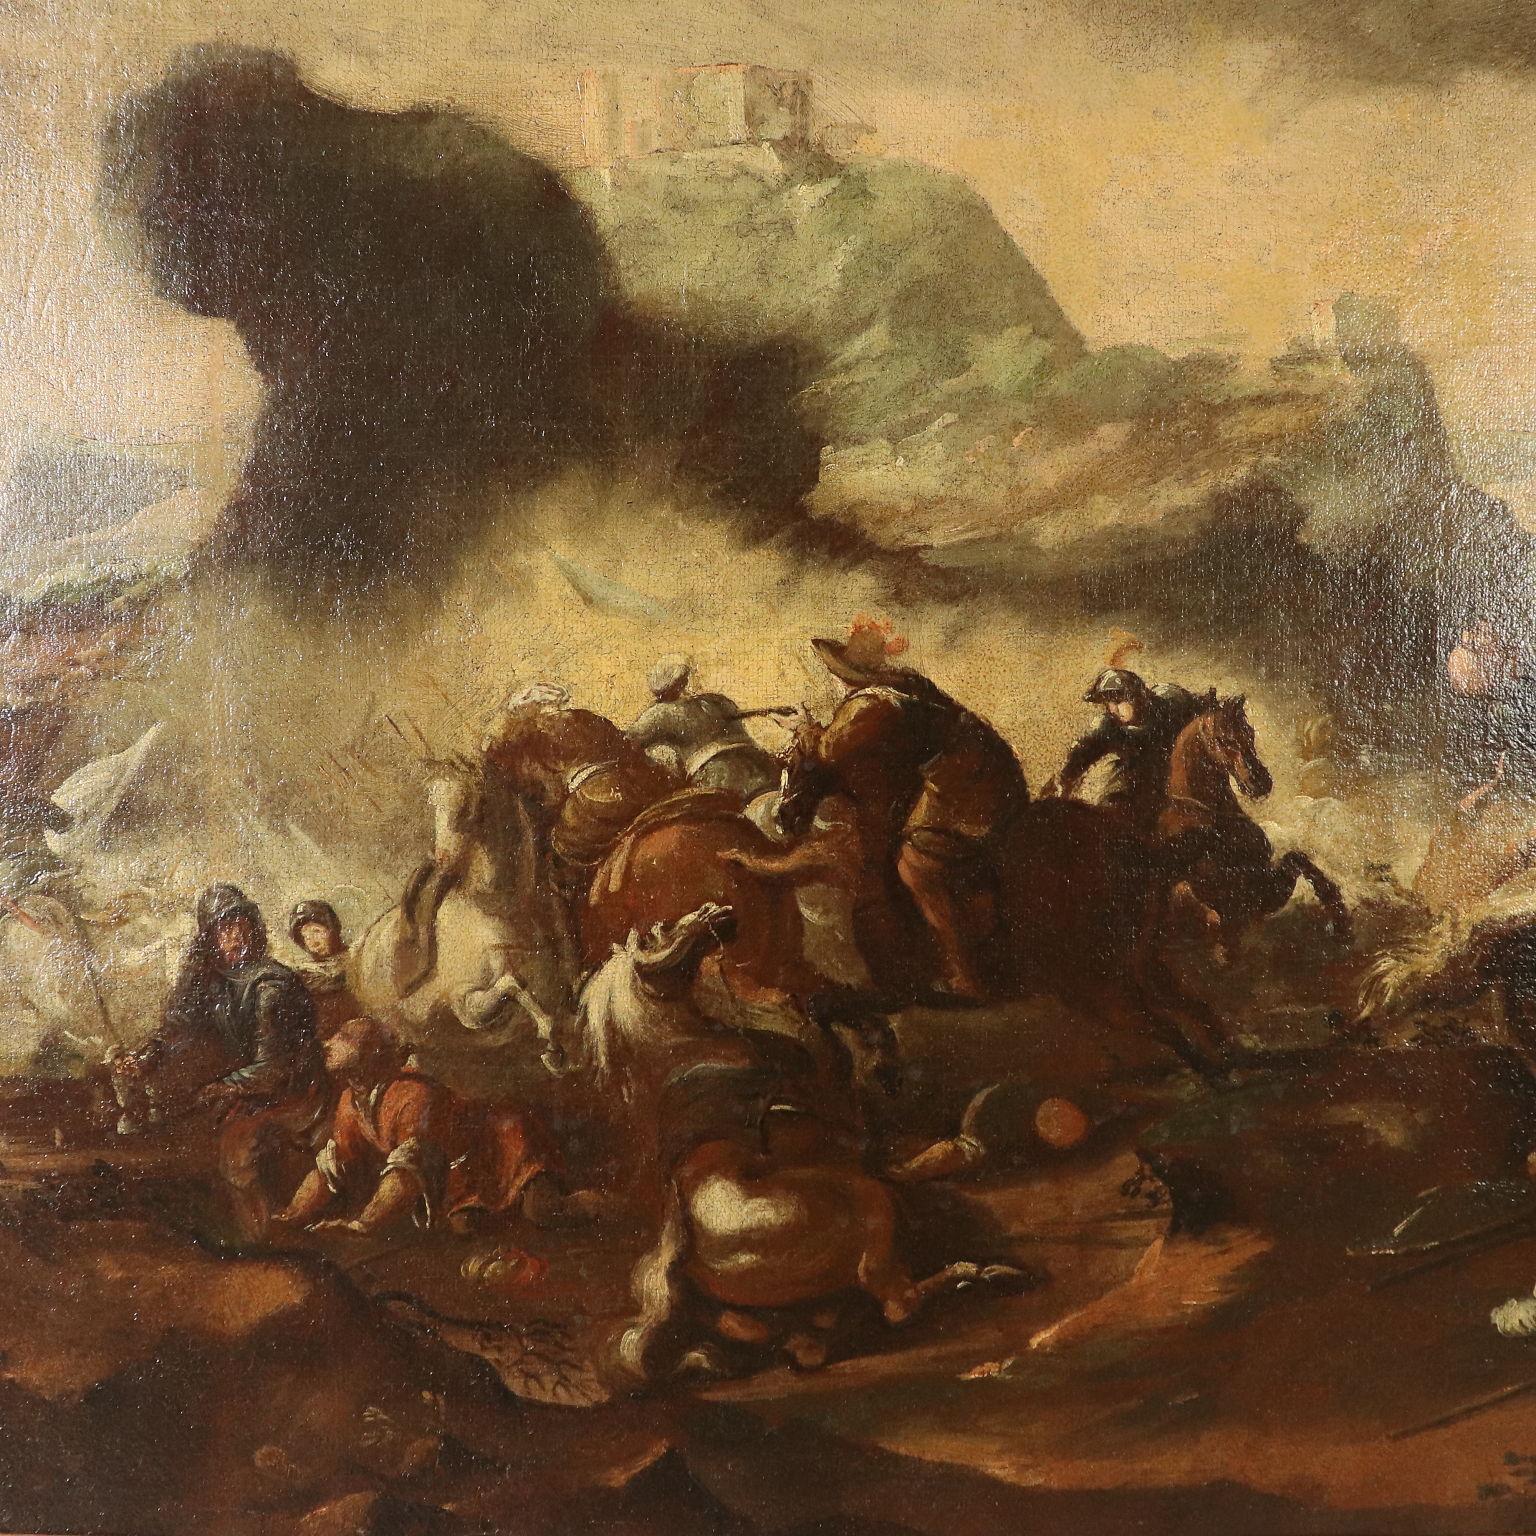 Battle Scene Oil on Canvas Late 17th Century - Brown Landscape Painting by Unknown